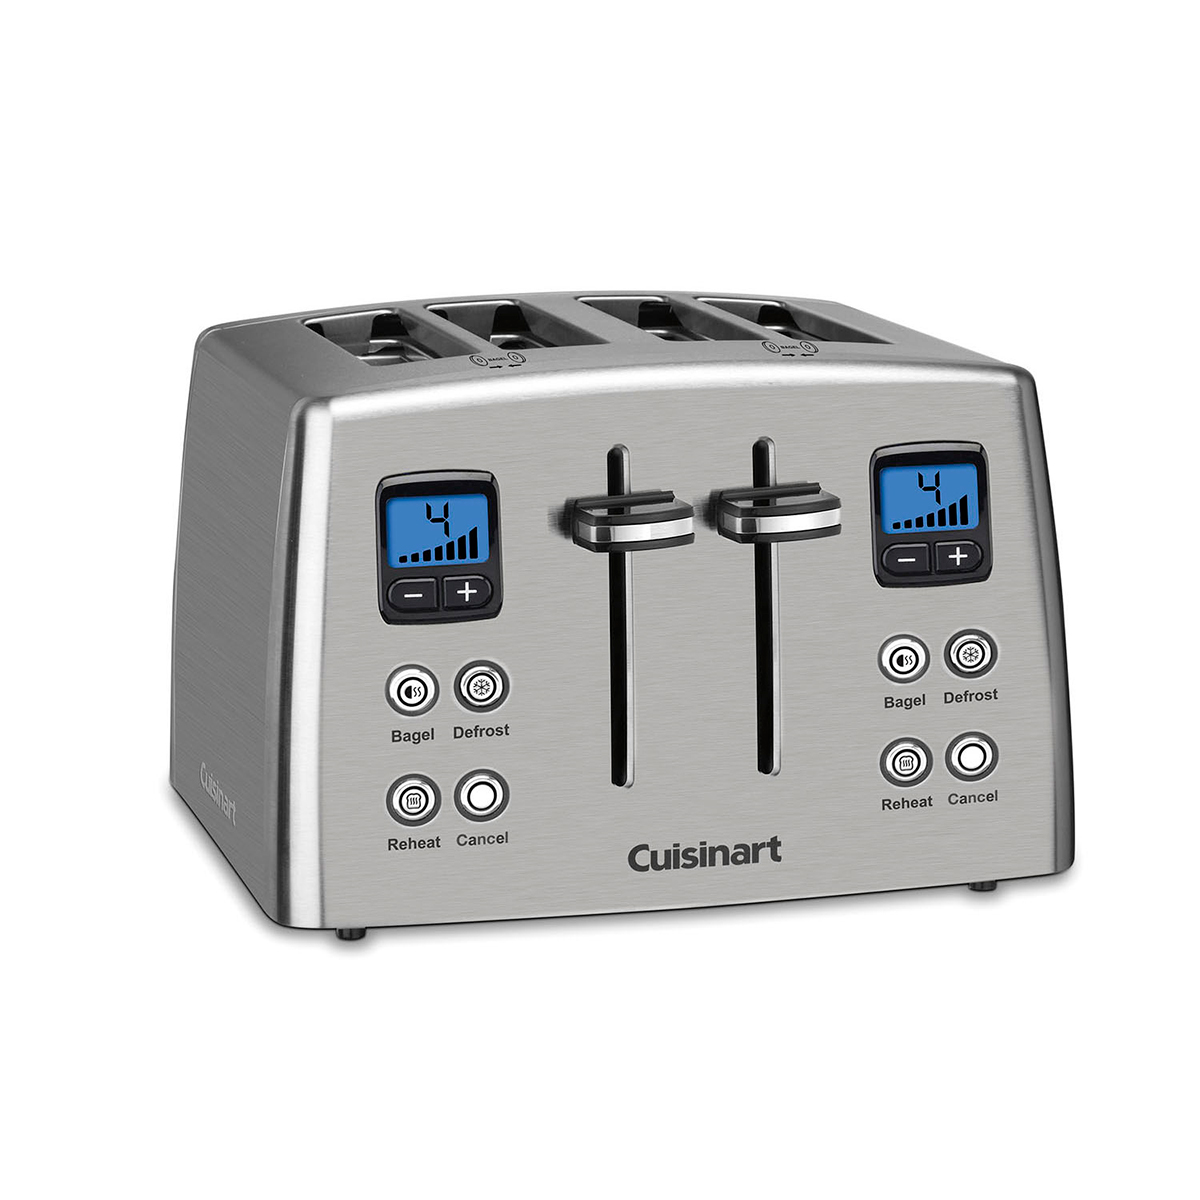 Cuisinart(R) Stainless Steel 4 Slice Countdown Toaster